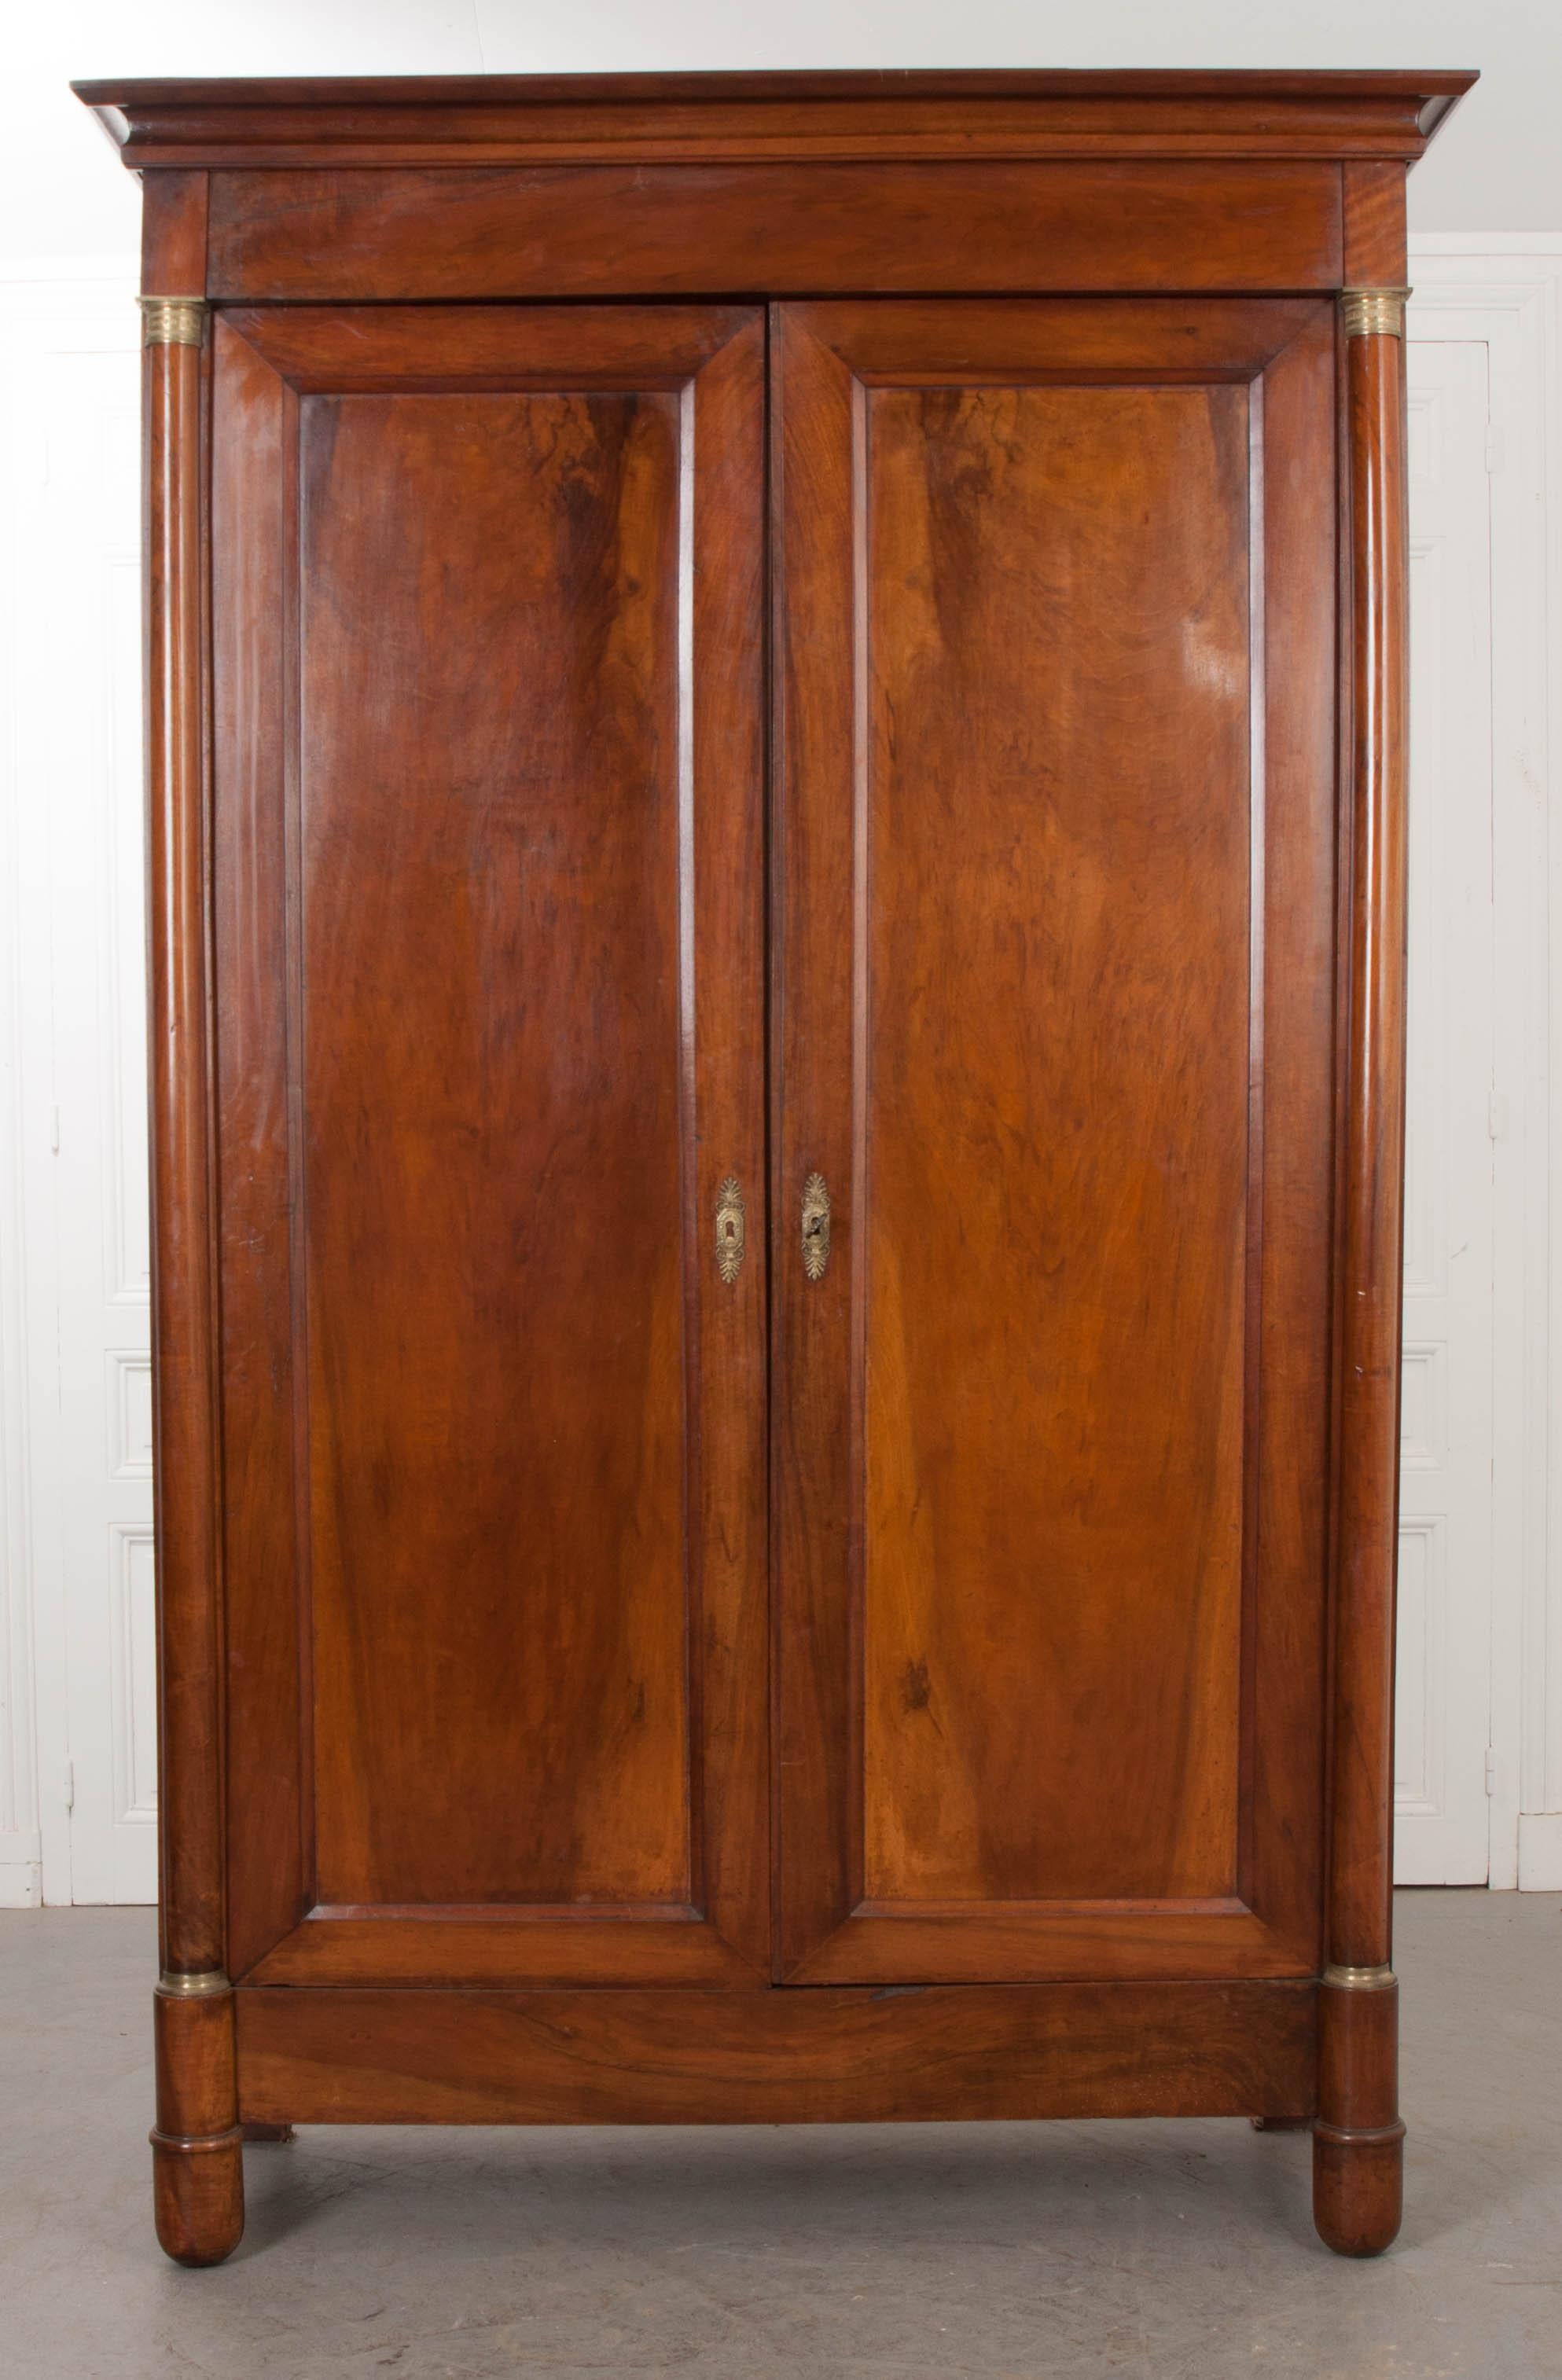 This elegant two-door walnut armoire is from France, circa 1850s, featuring a molded frieze over two doors with book-matched mahogany veneers and flanked by brass-collared pilasters. The doors, with brass palmette escutcheons, open to reveal two